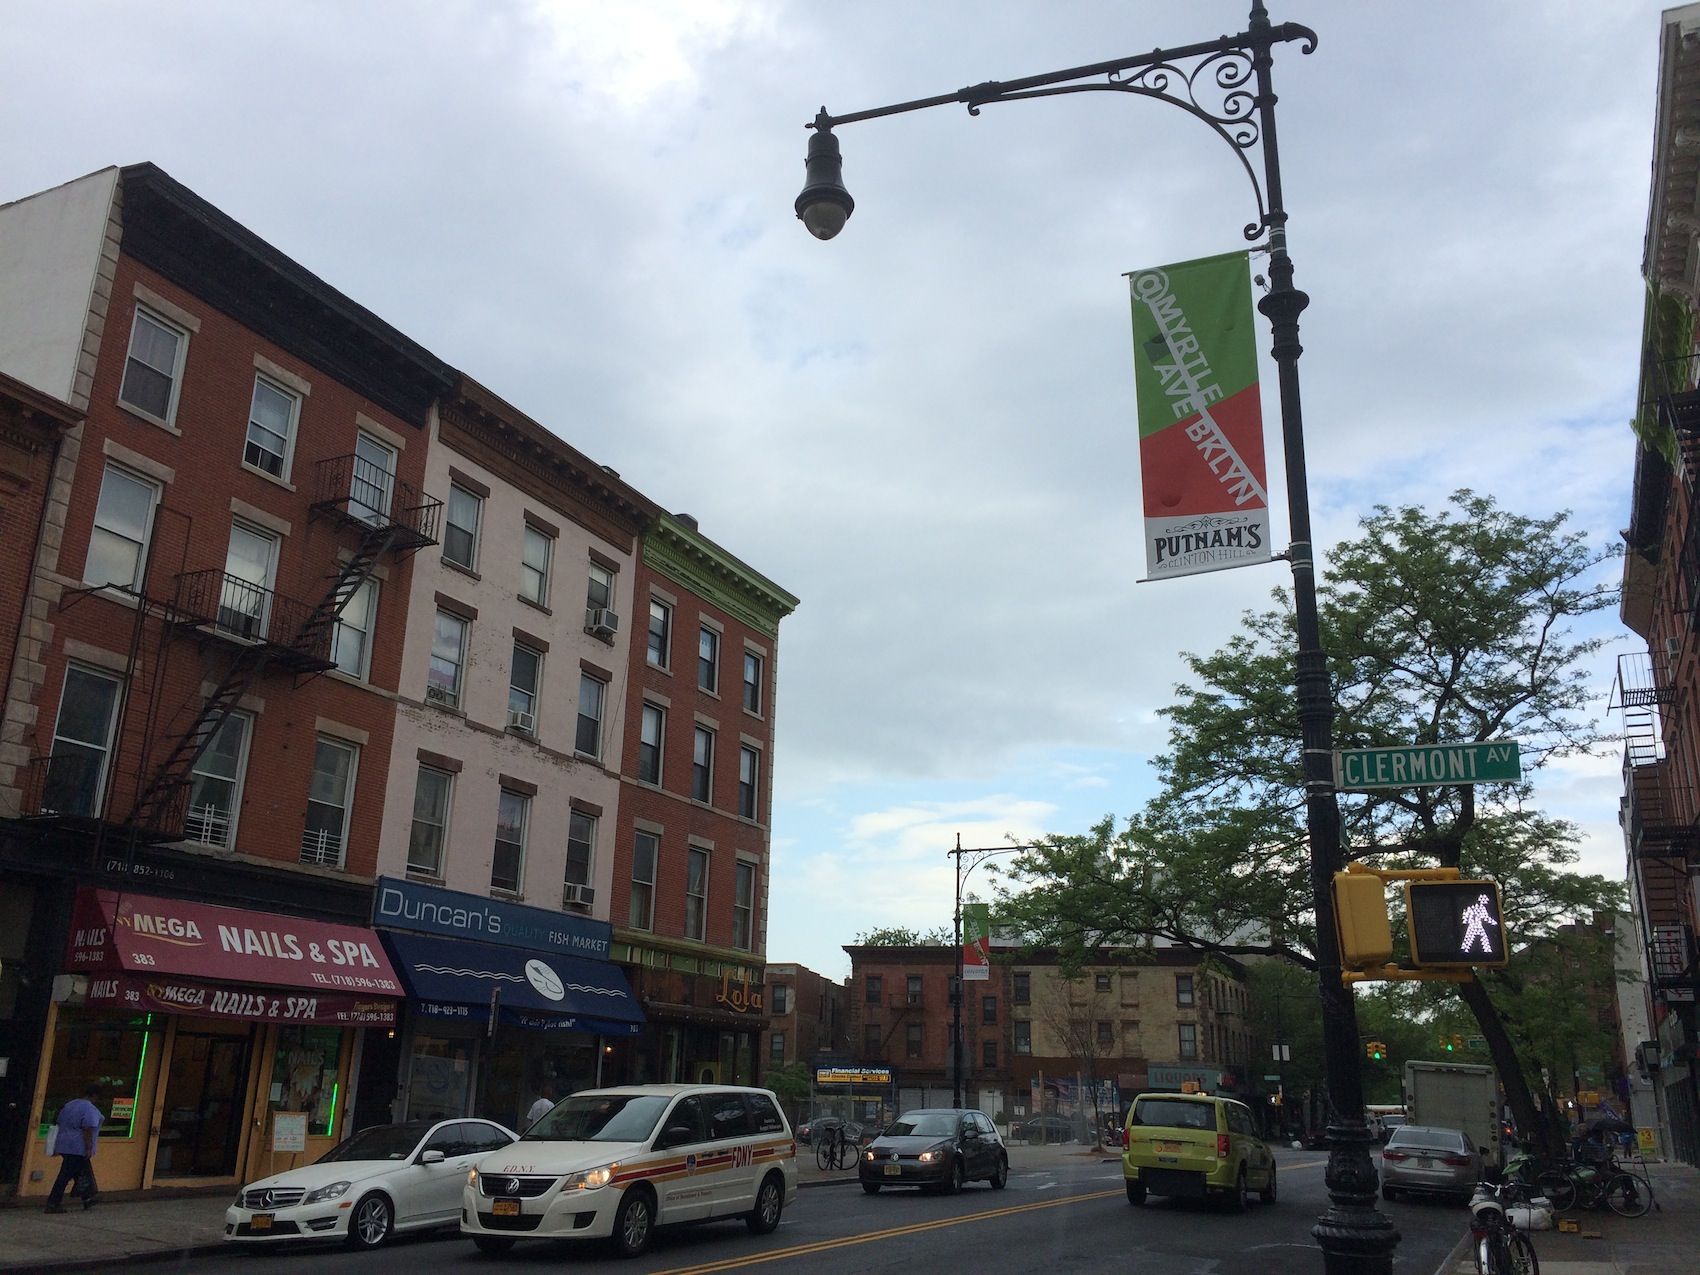 Behind The New Myrtle Avenue Business Banners